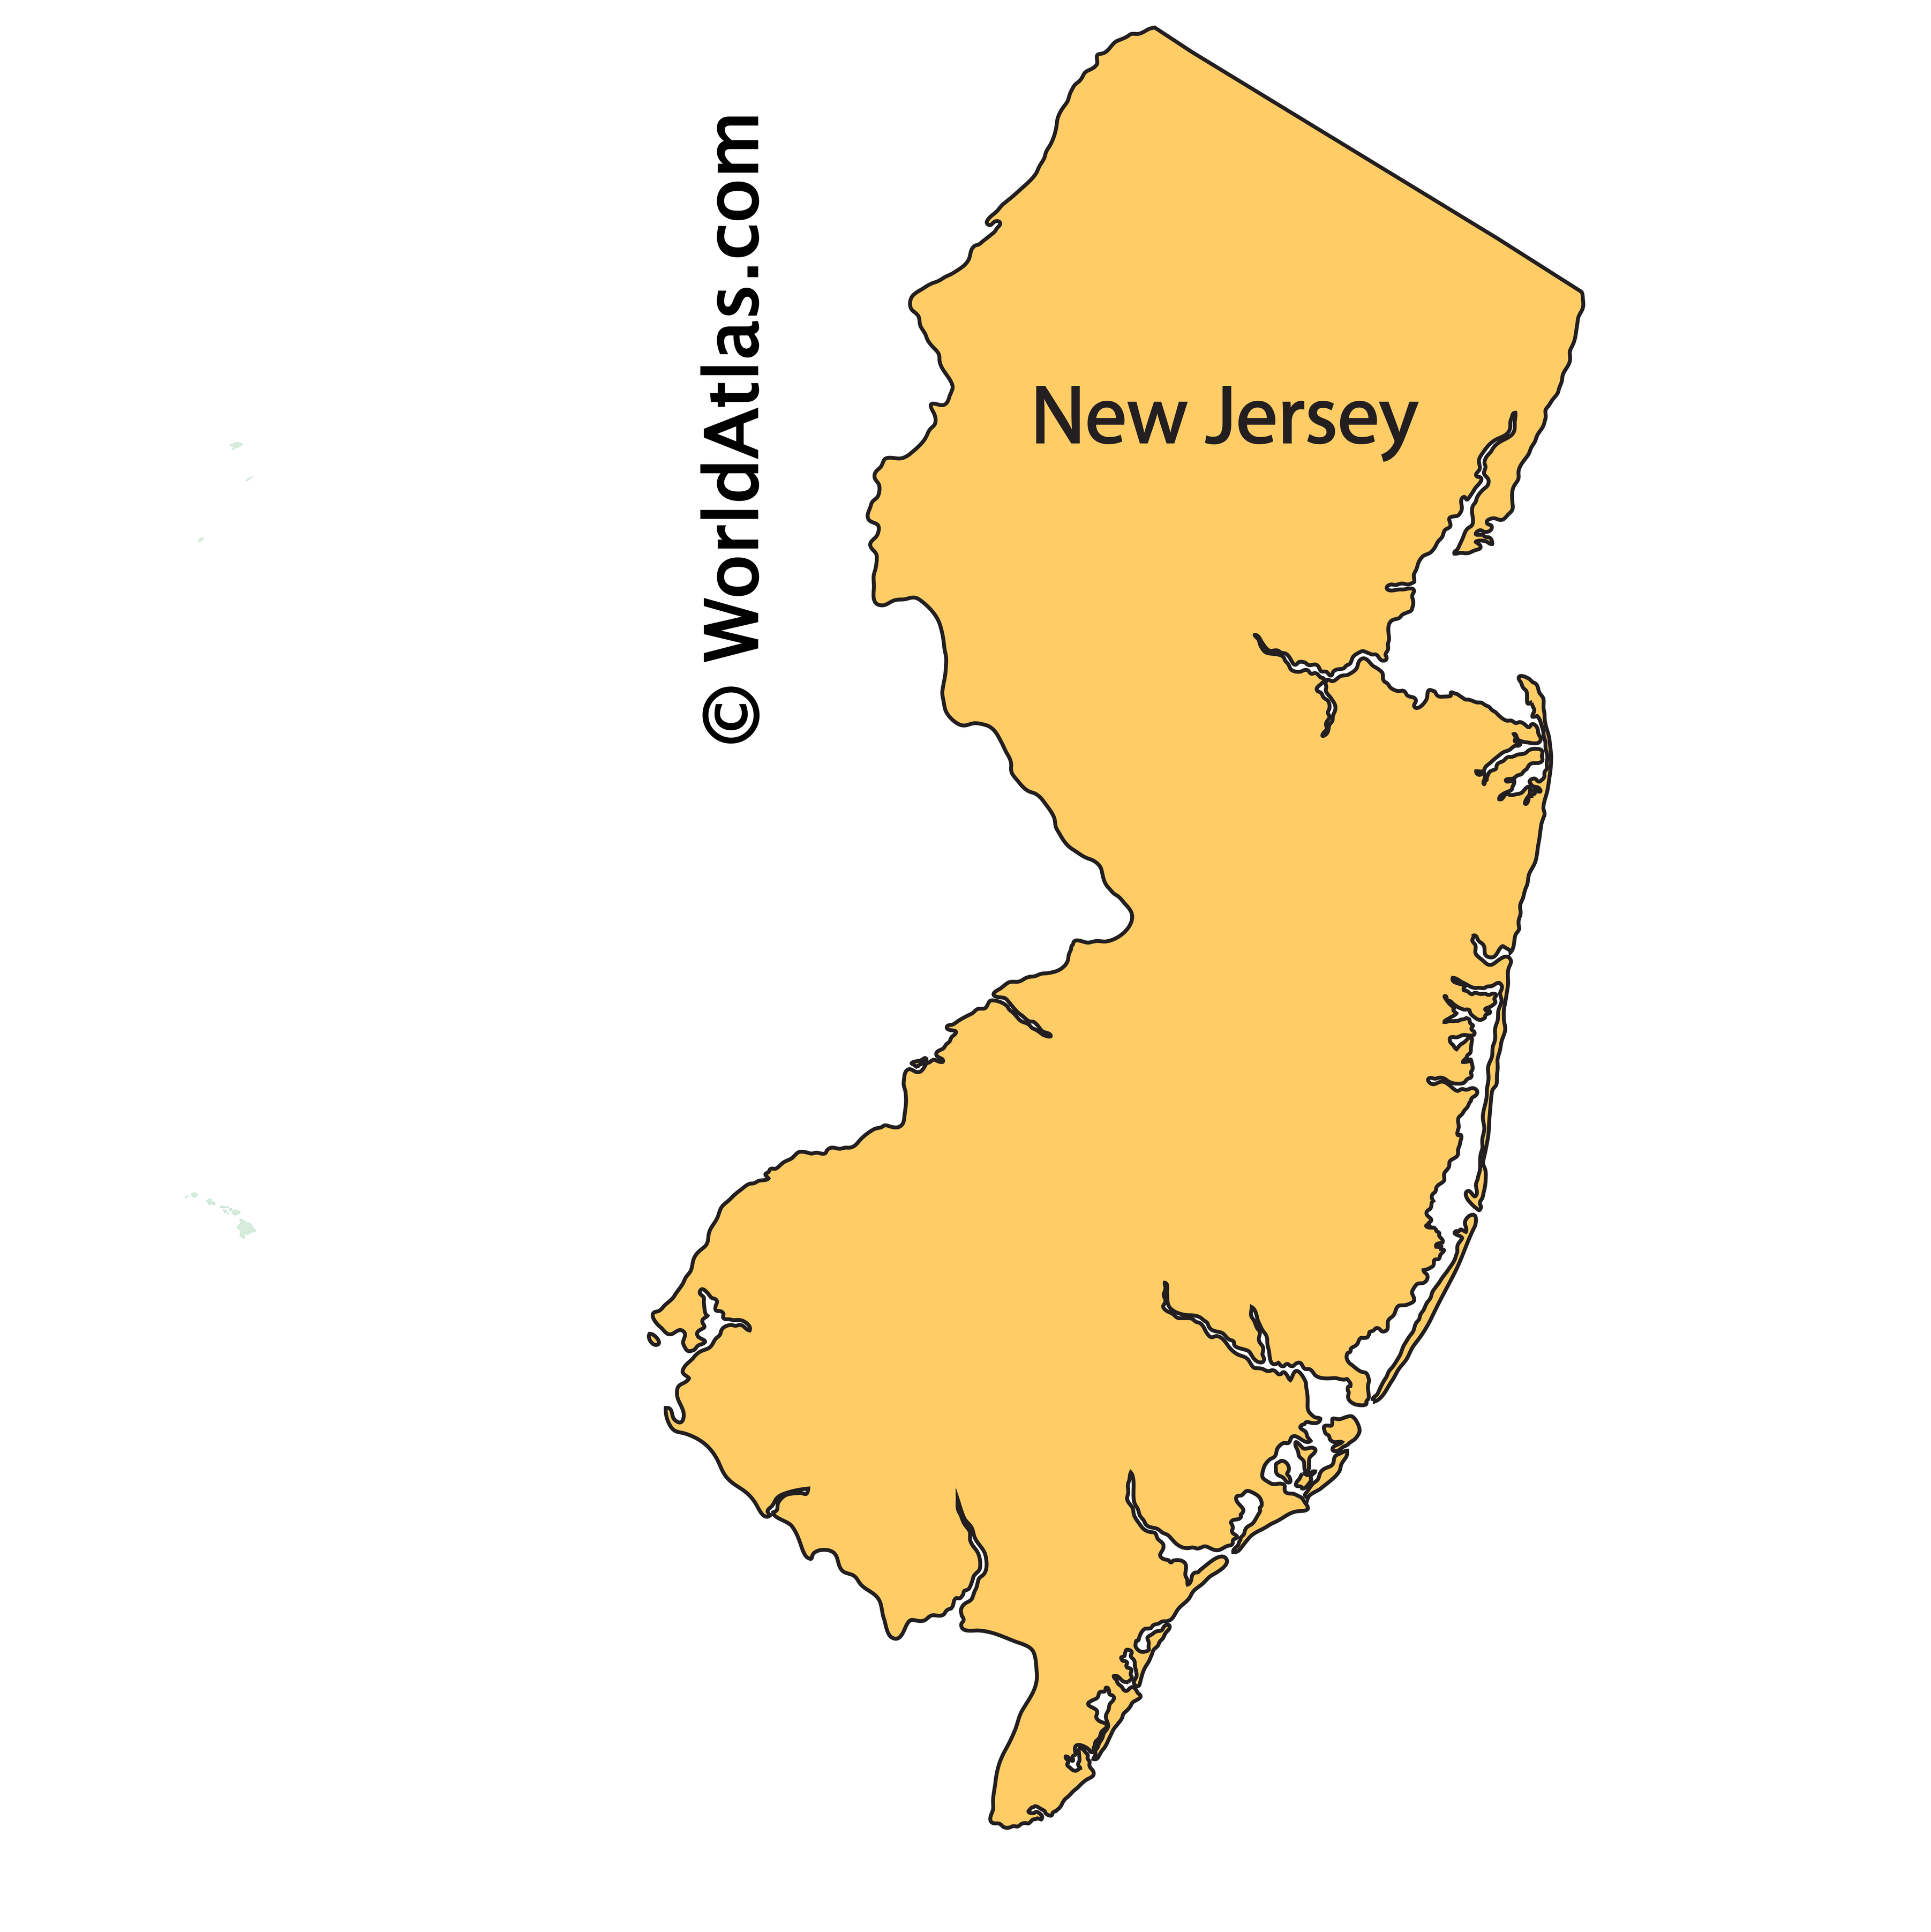 MAP OF NEW JERSEY - NJ County Map - New jersey state map of nj